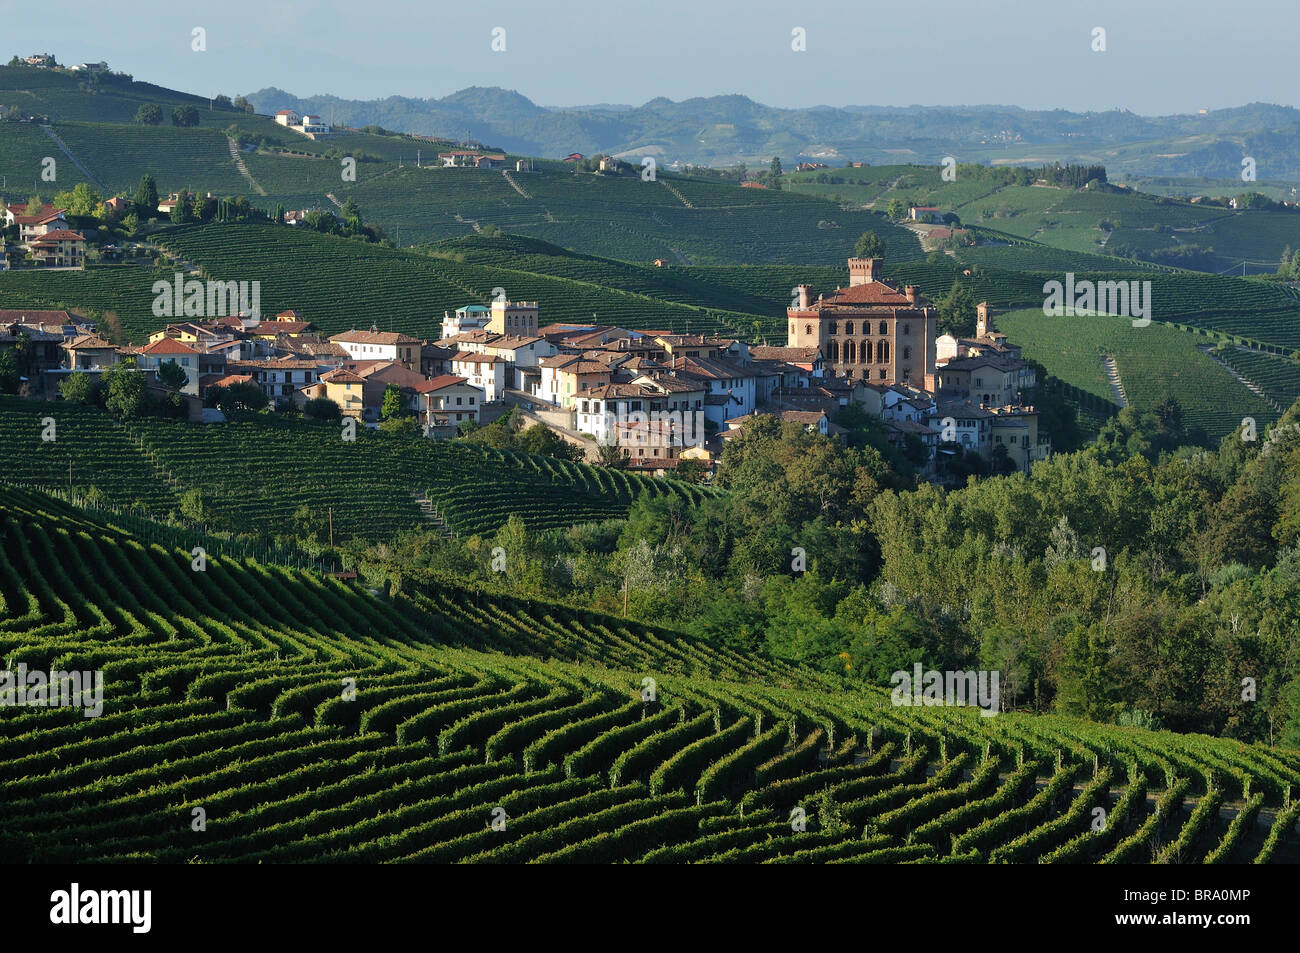 Barolo. Italy. The small town of Barolo nestled amongst vineyards in the Langhe region of Piedmont. Stock Photo